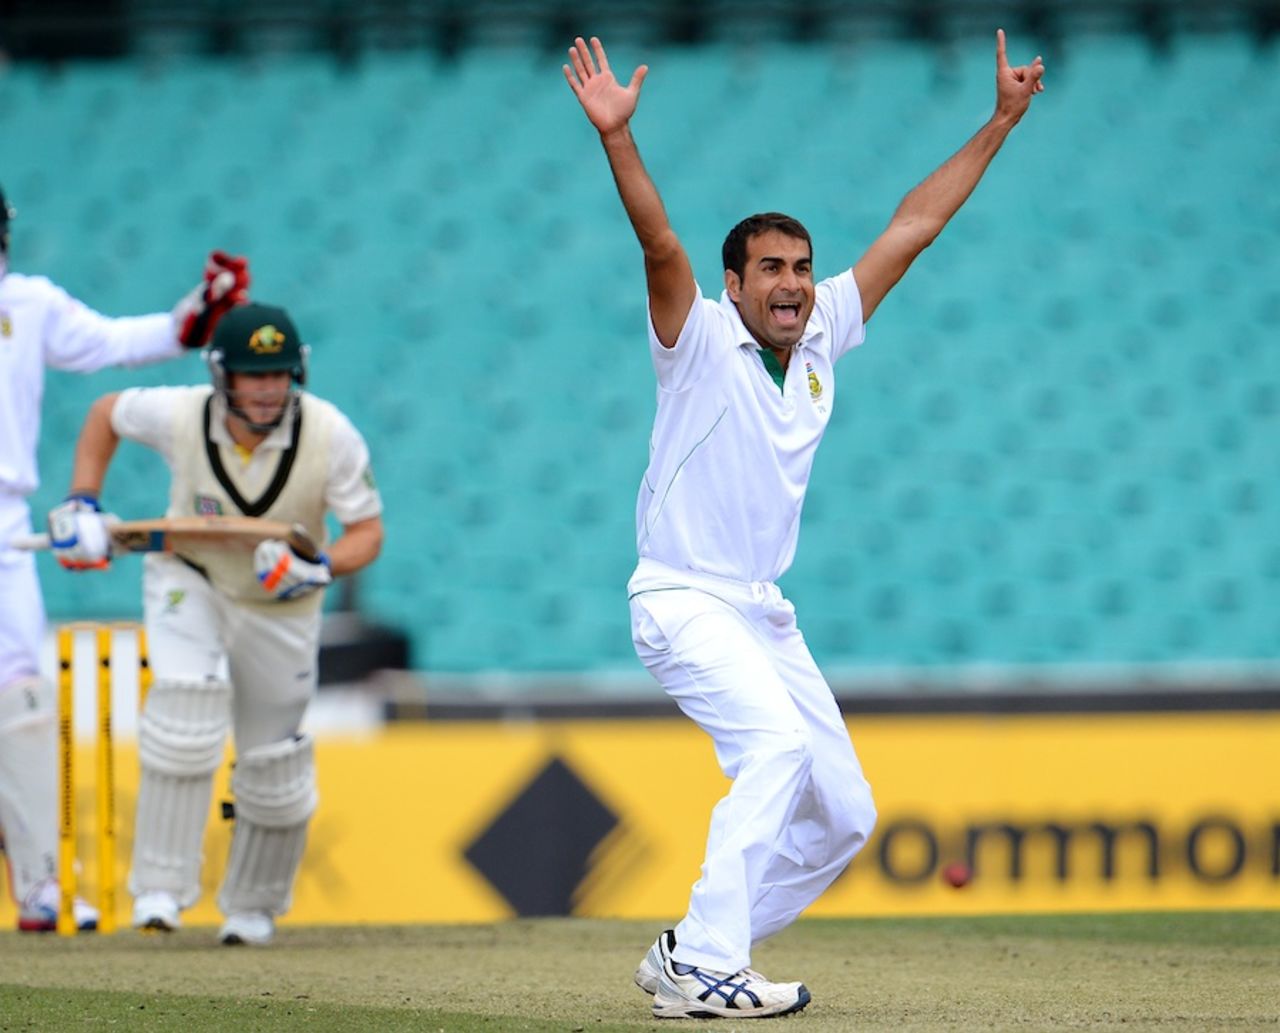 Imran Tahir appeals against Tim Paine, Australia A v South Africans, Sydney, 2nd day, November 3, 2012